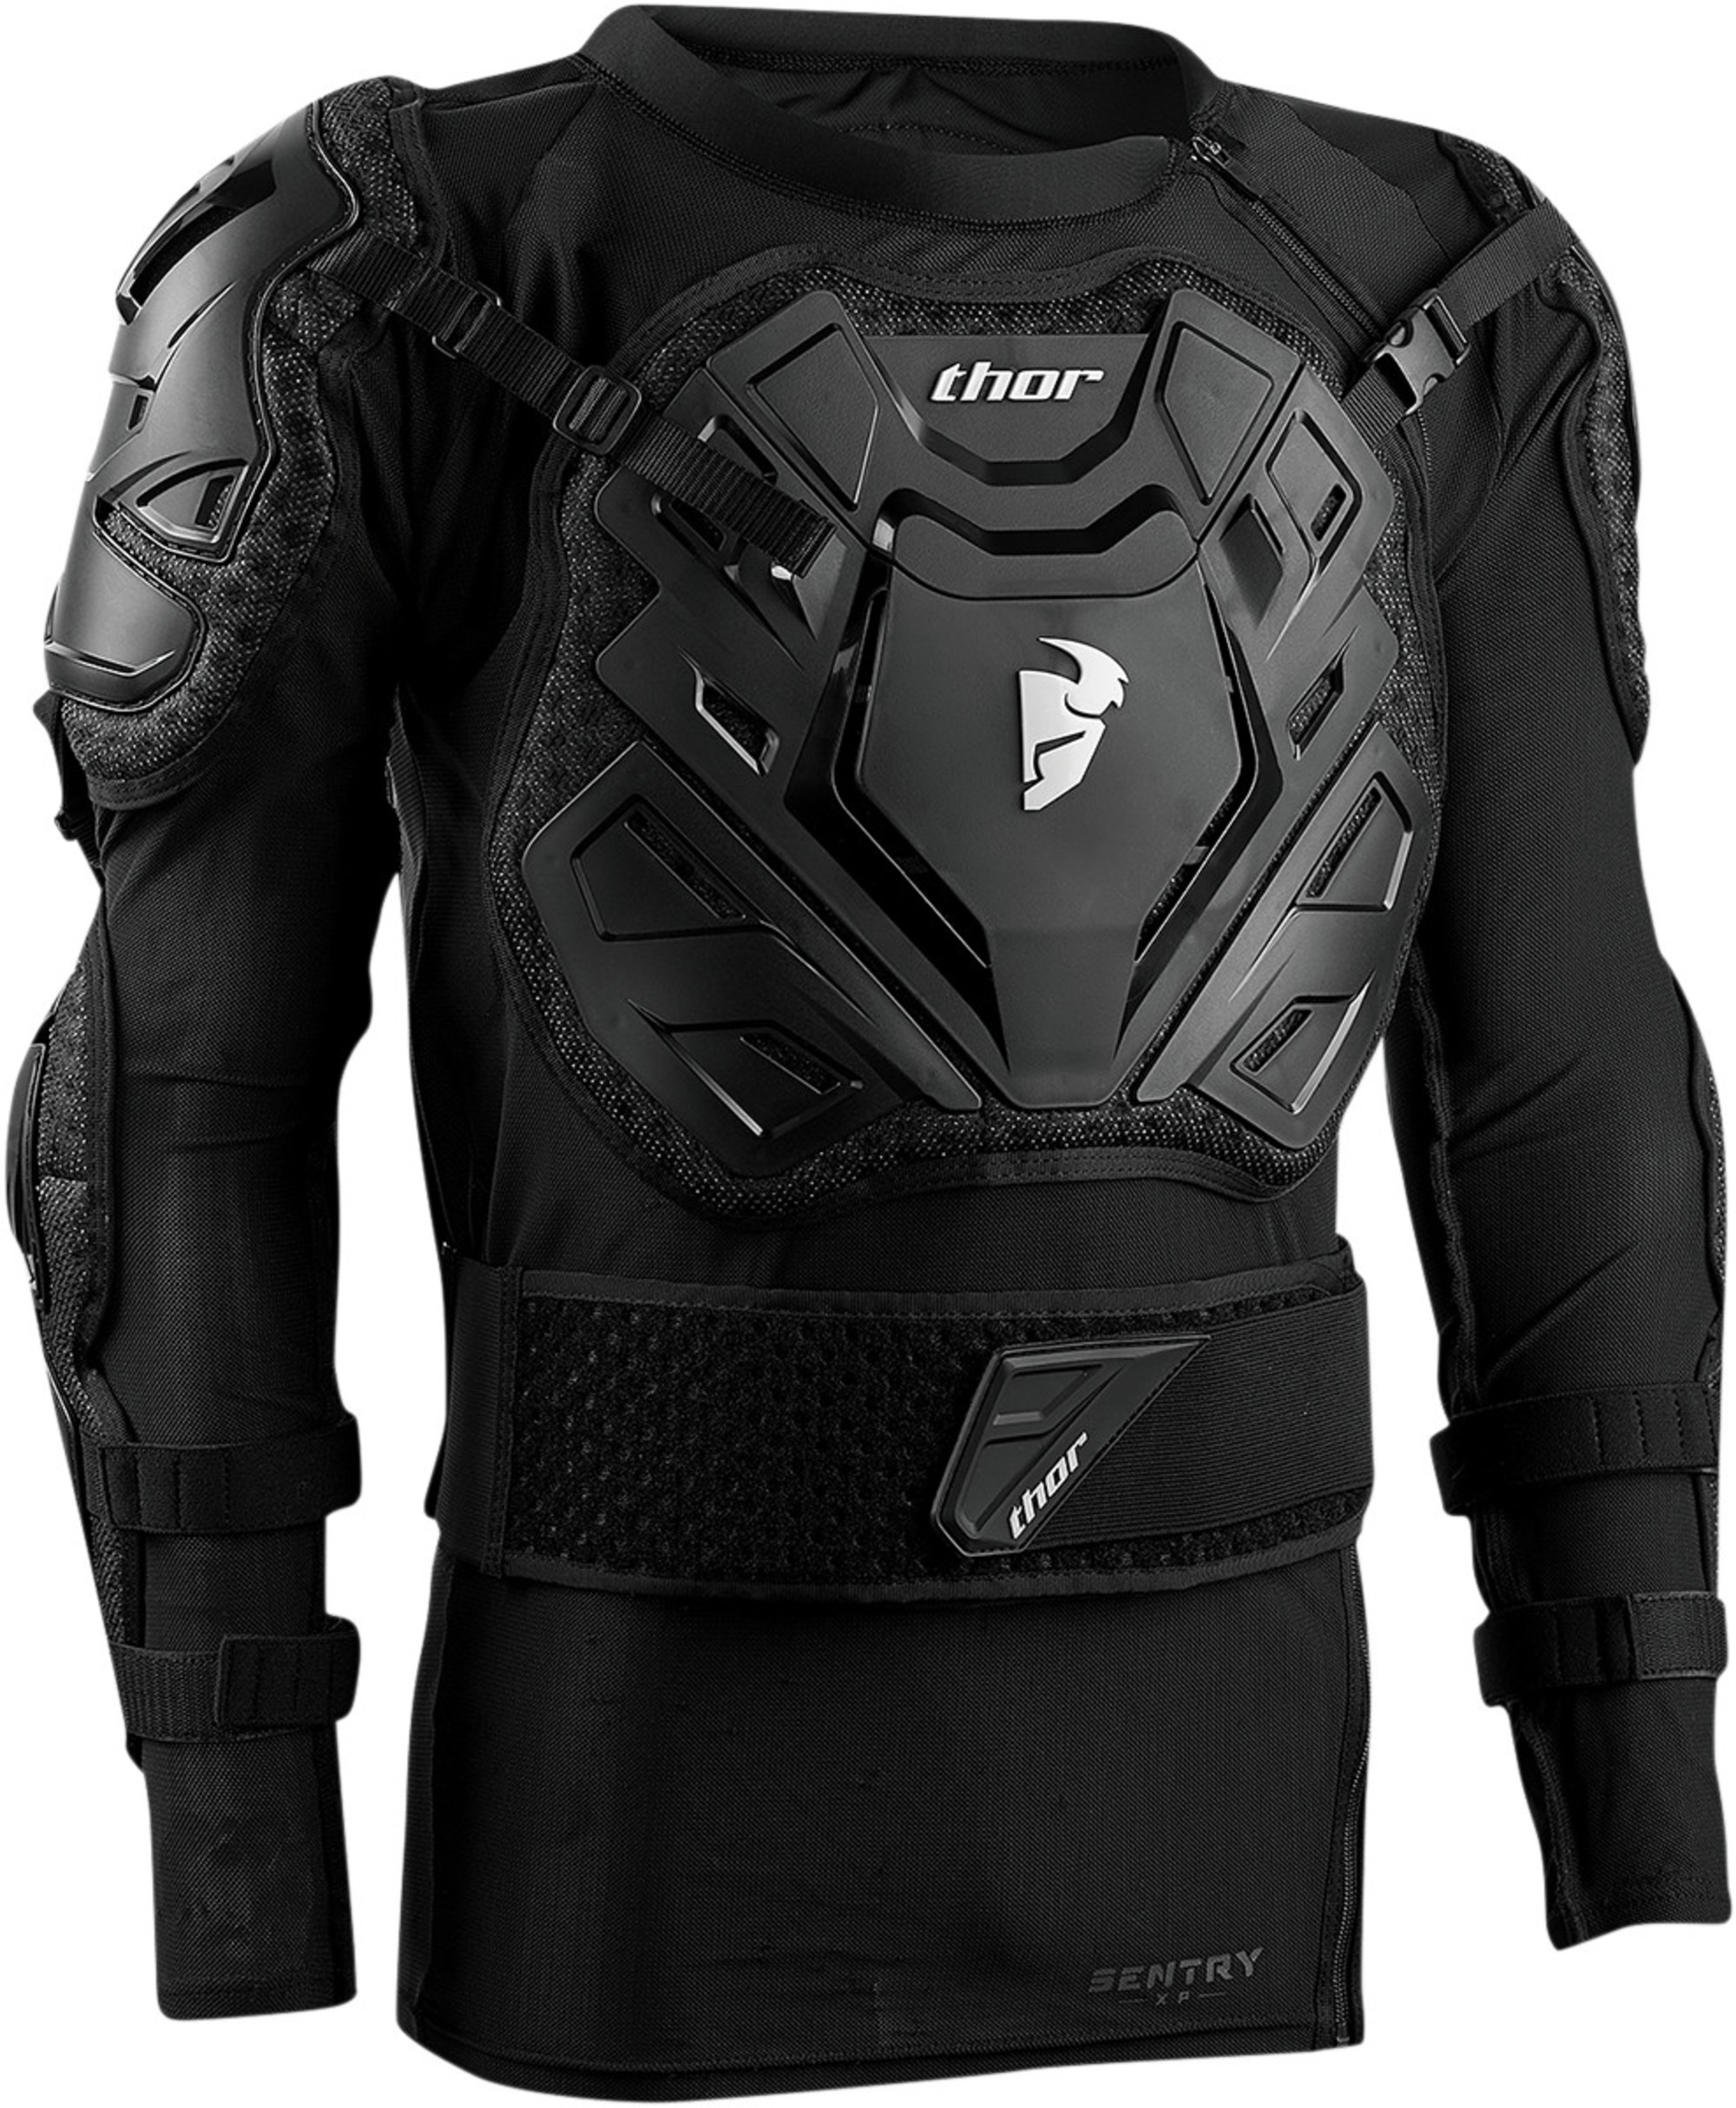 motocross protections sous-protections par thor adult sentry xp